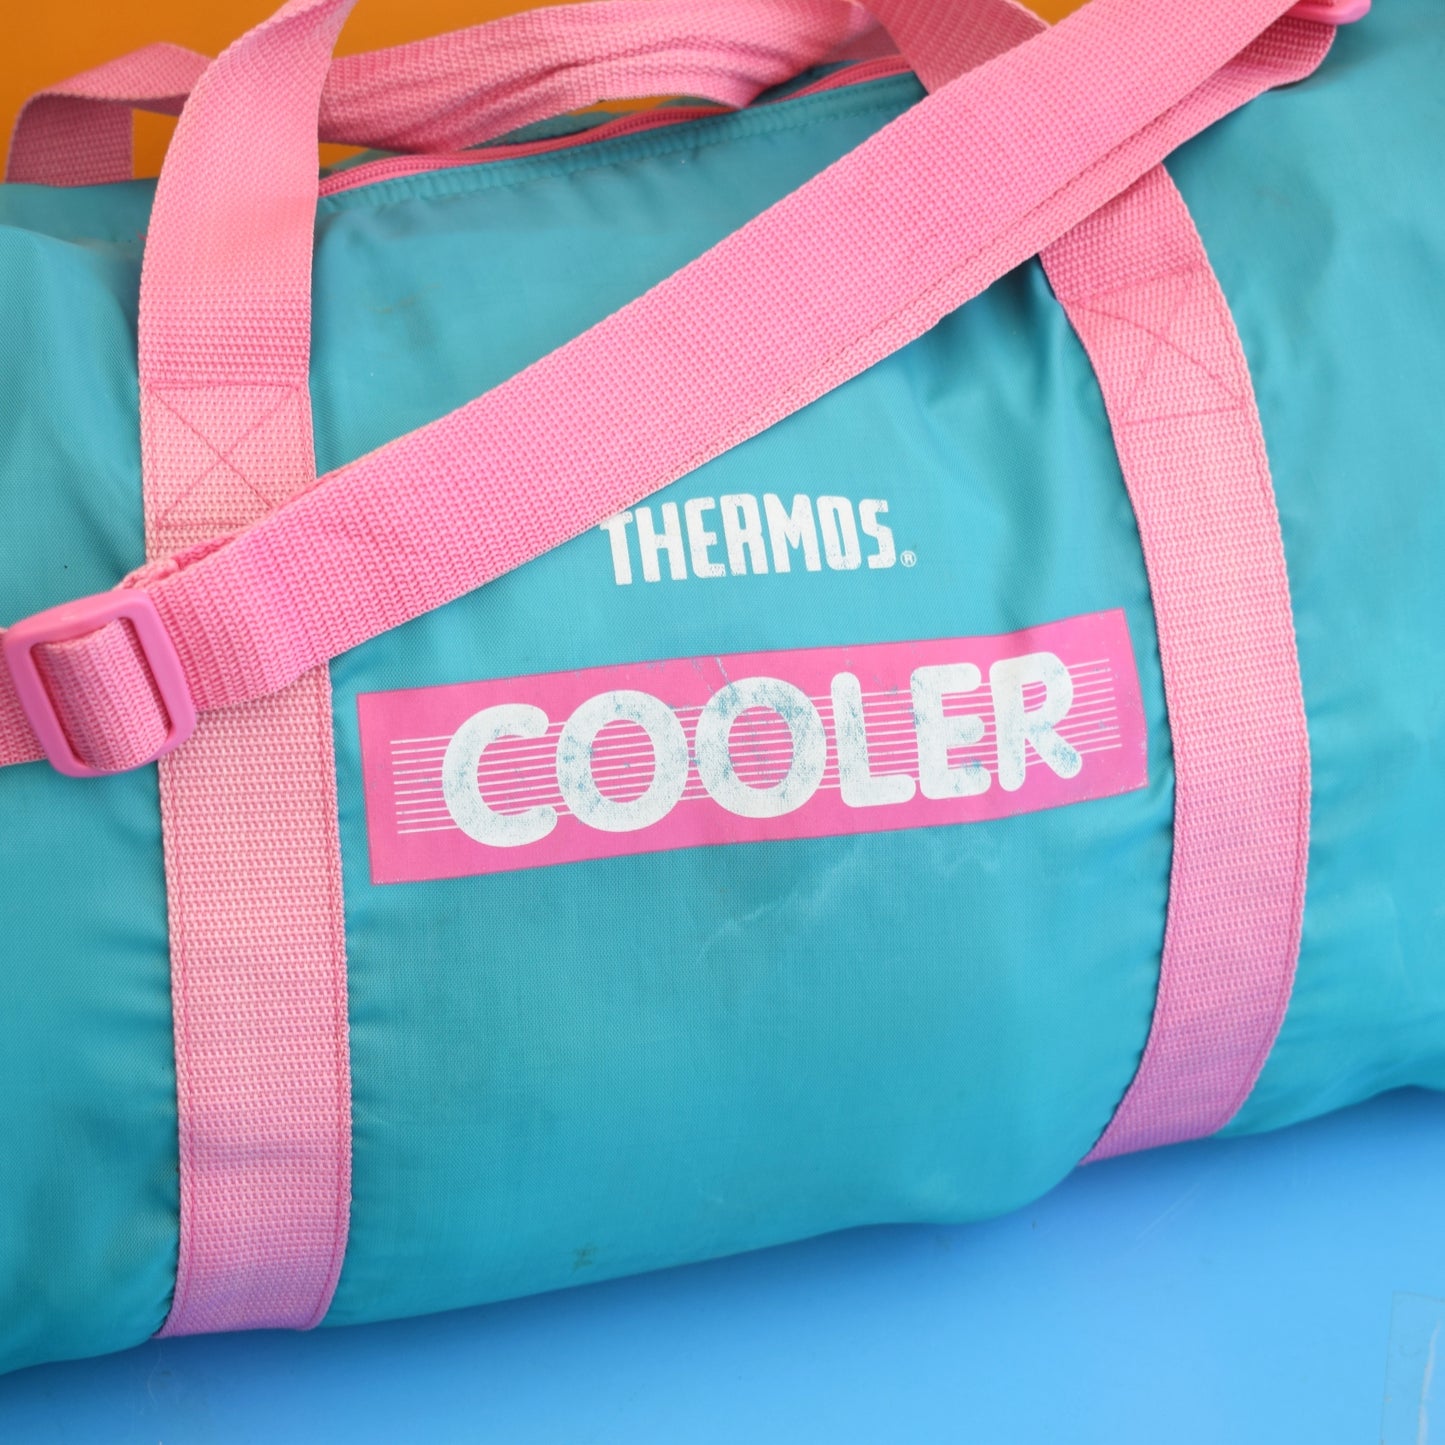 Vintage 1980s Holdall / Cool Bag- Thermos